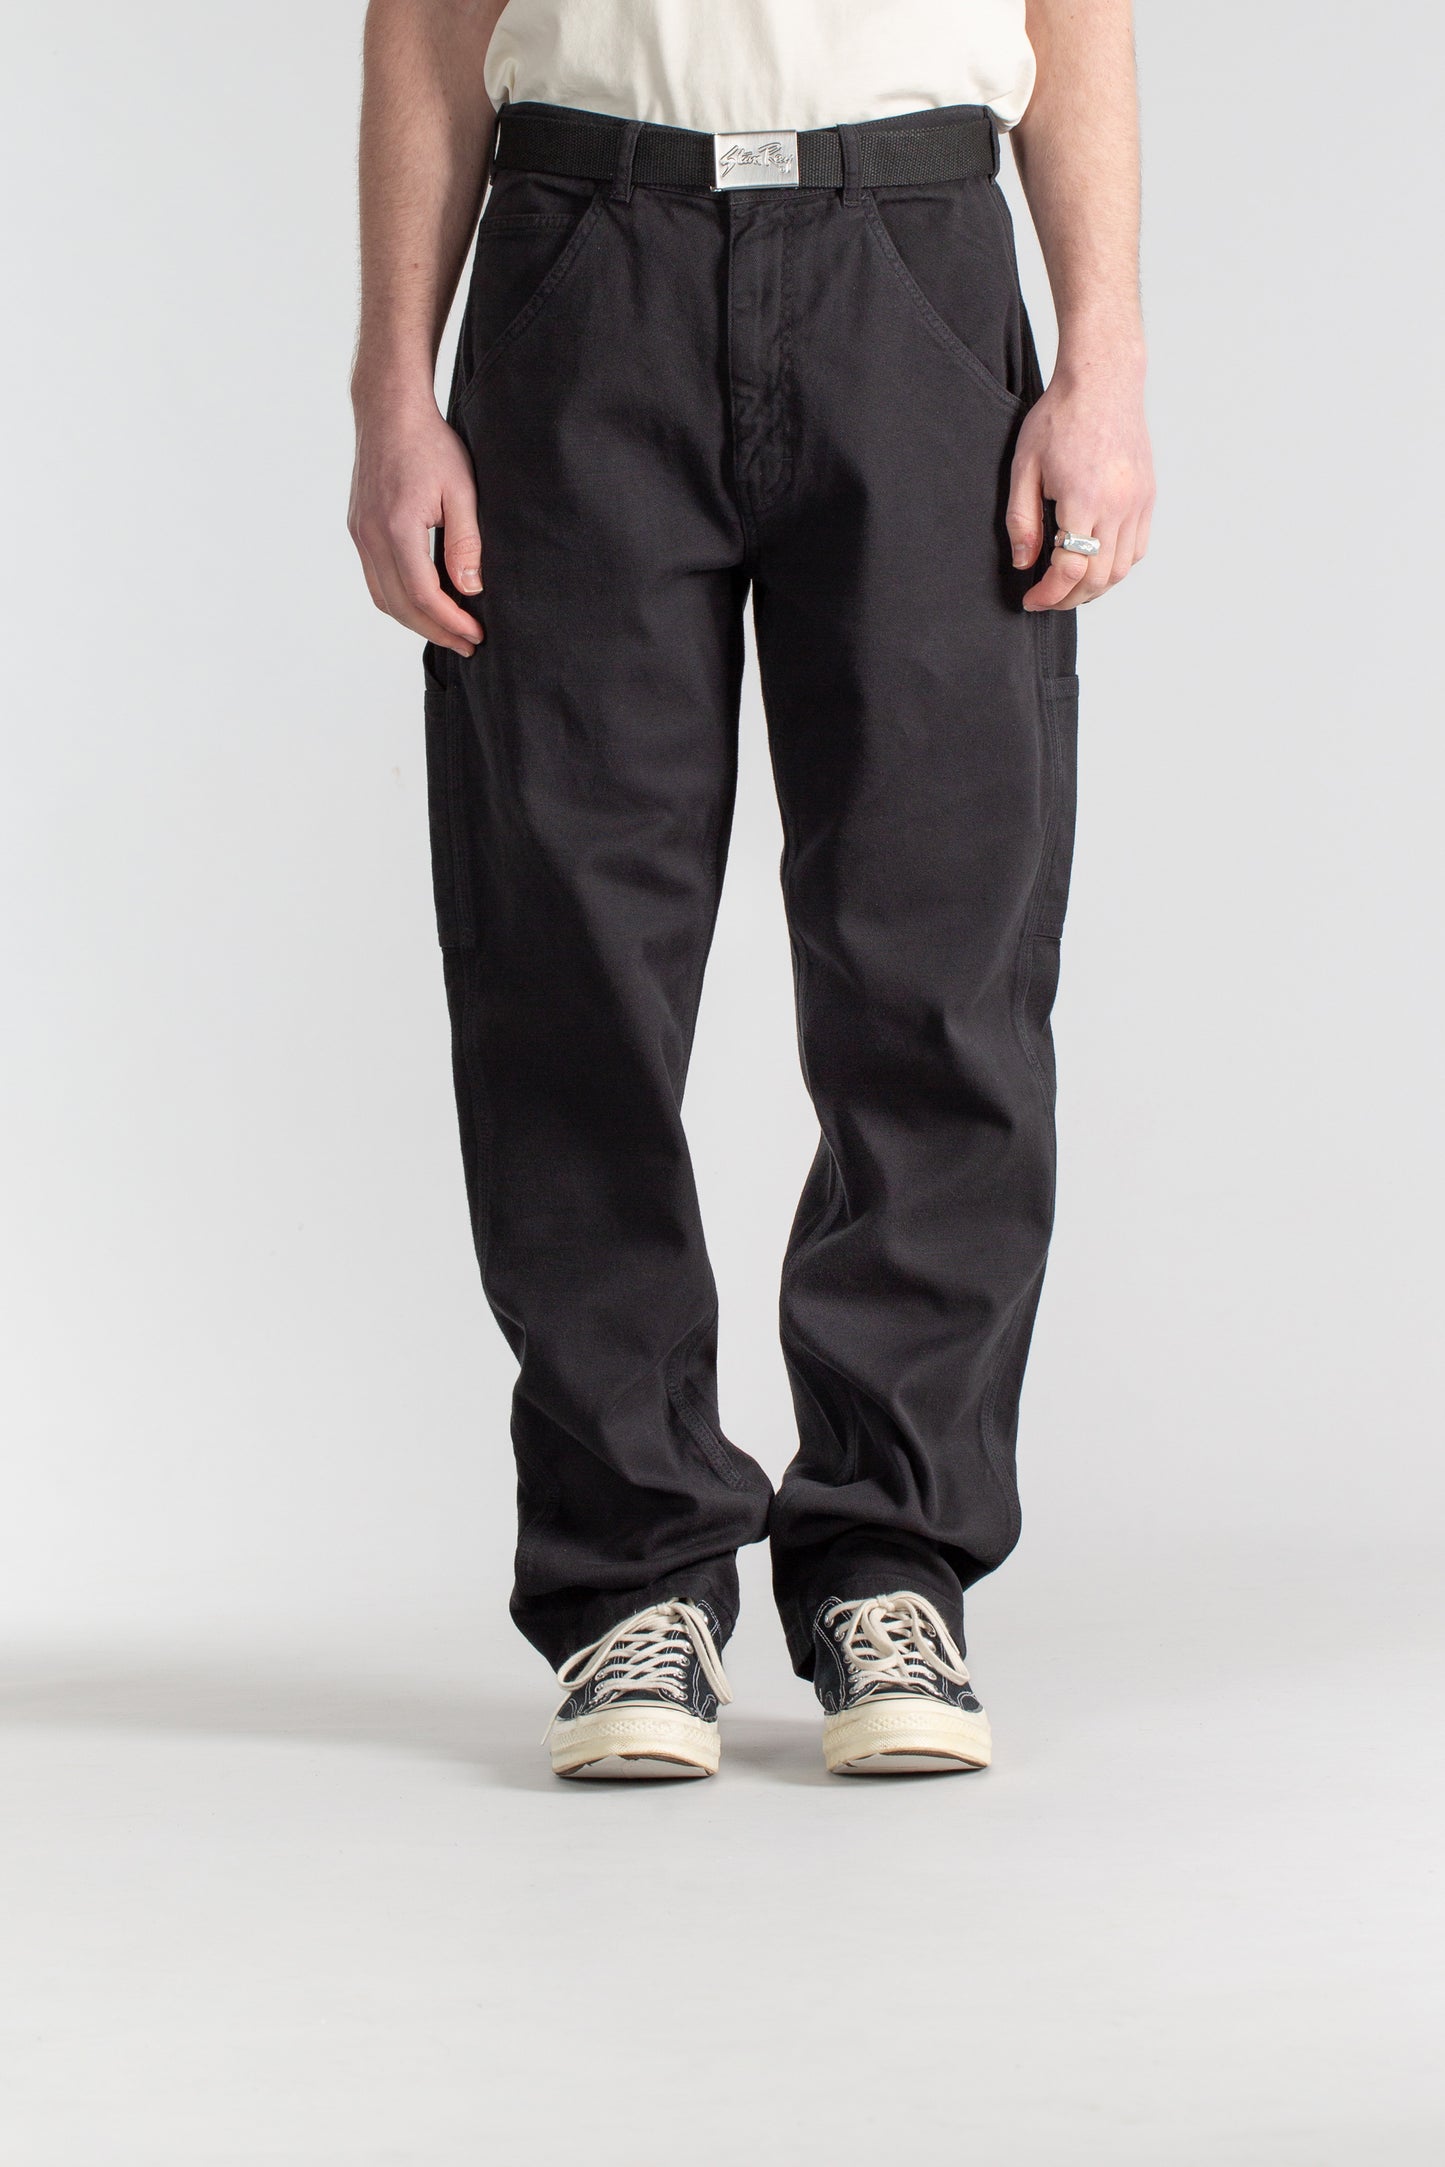 80s Painter Pant (Earl's Black Twill) – Stan Ray